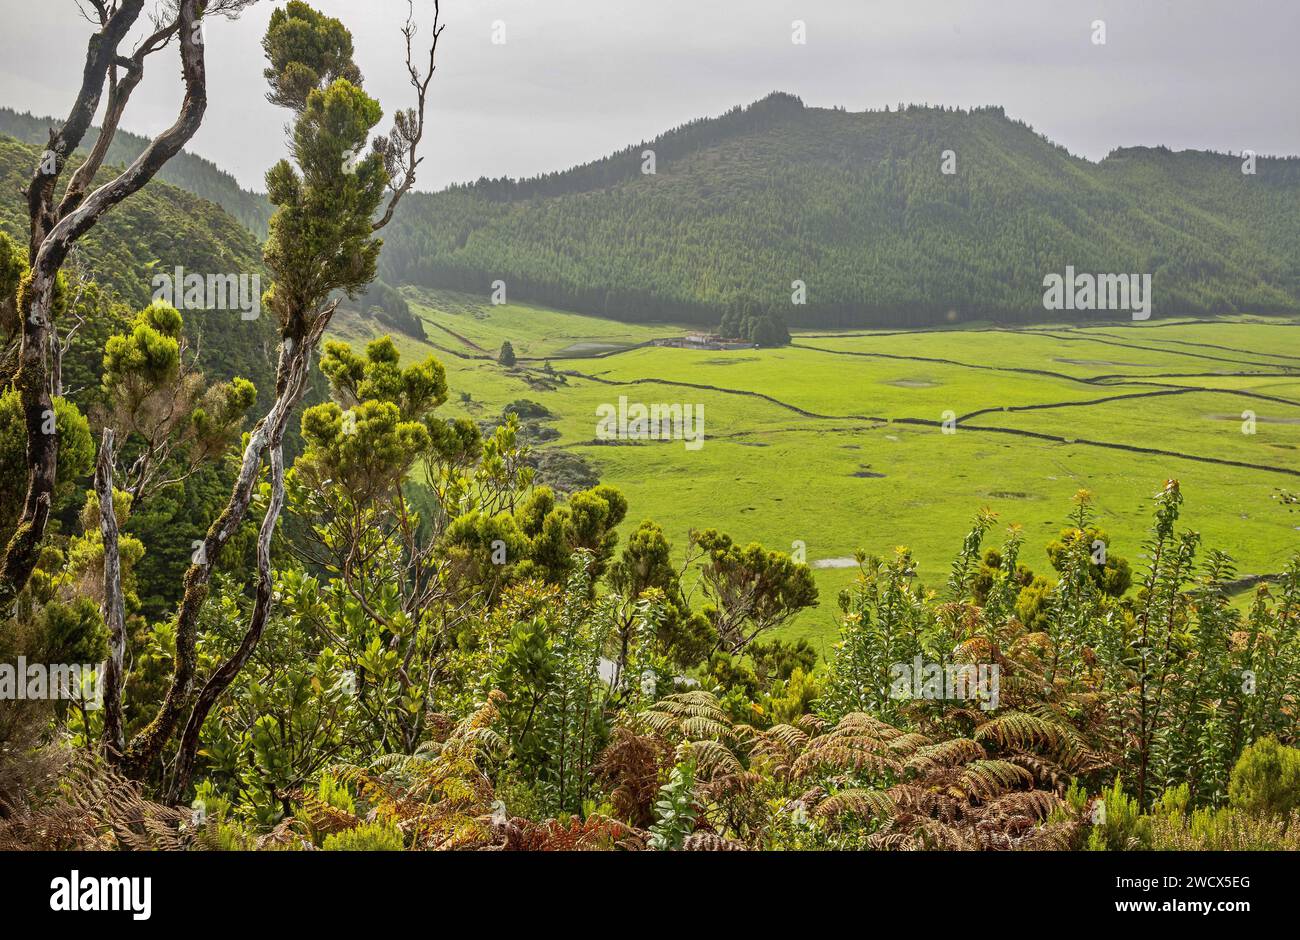 Portugal, Azores archipelago, Terceira island, Guiherme Moniz caldera, the largest crater in the Azores lined with green pastures Stock Photo